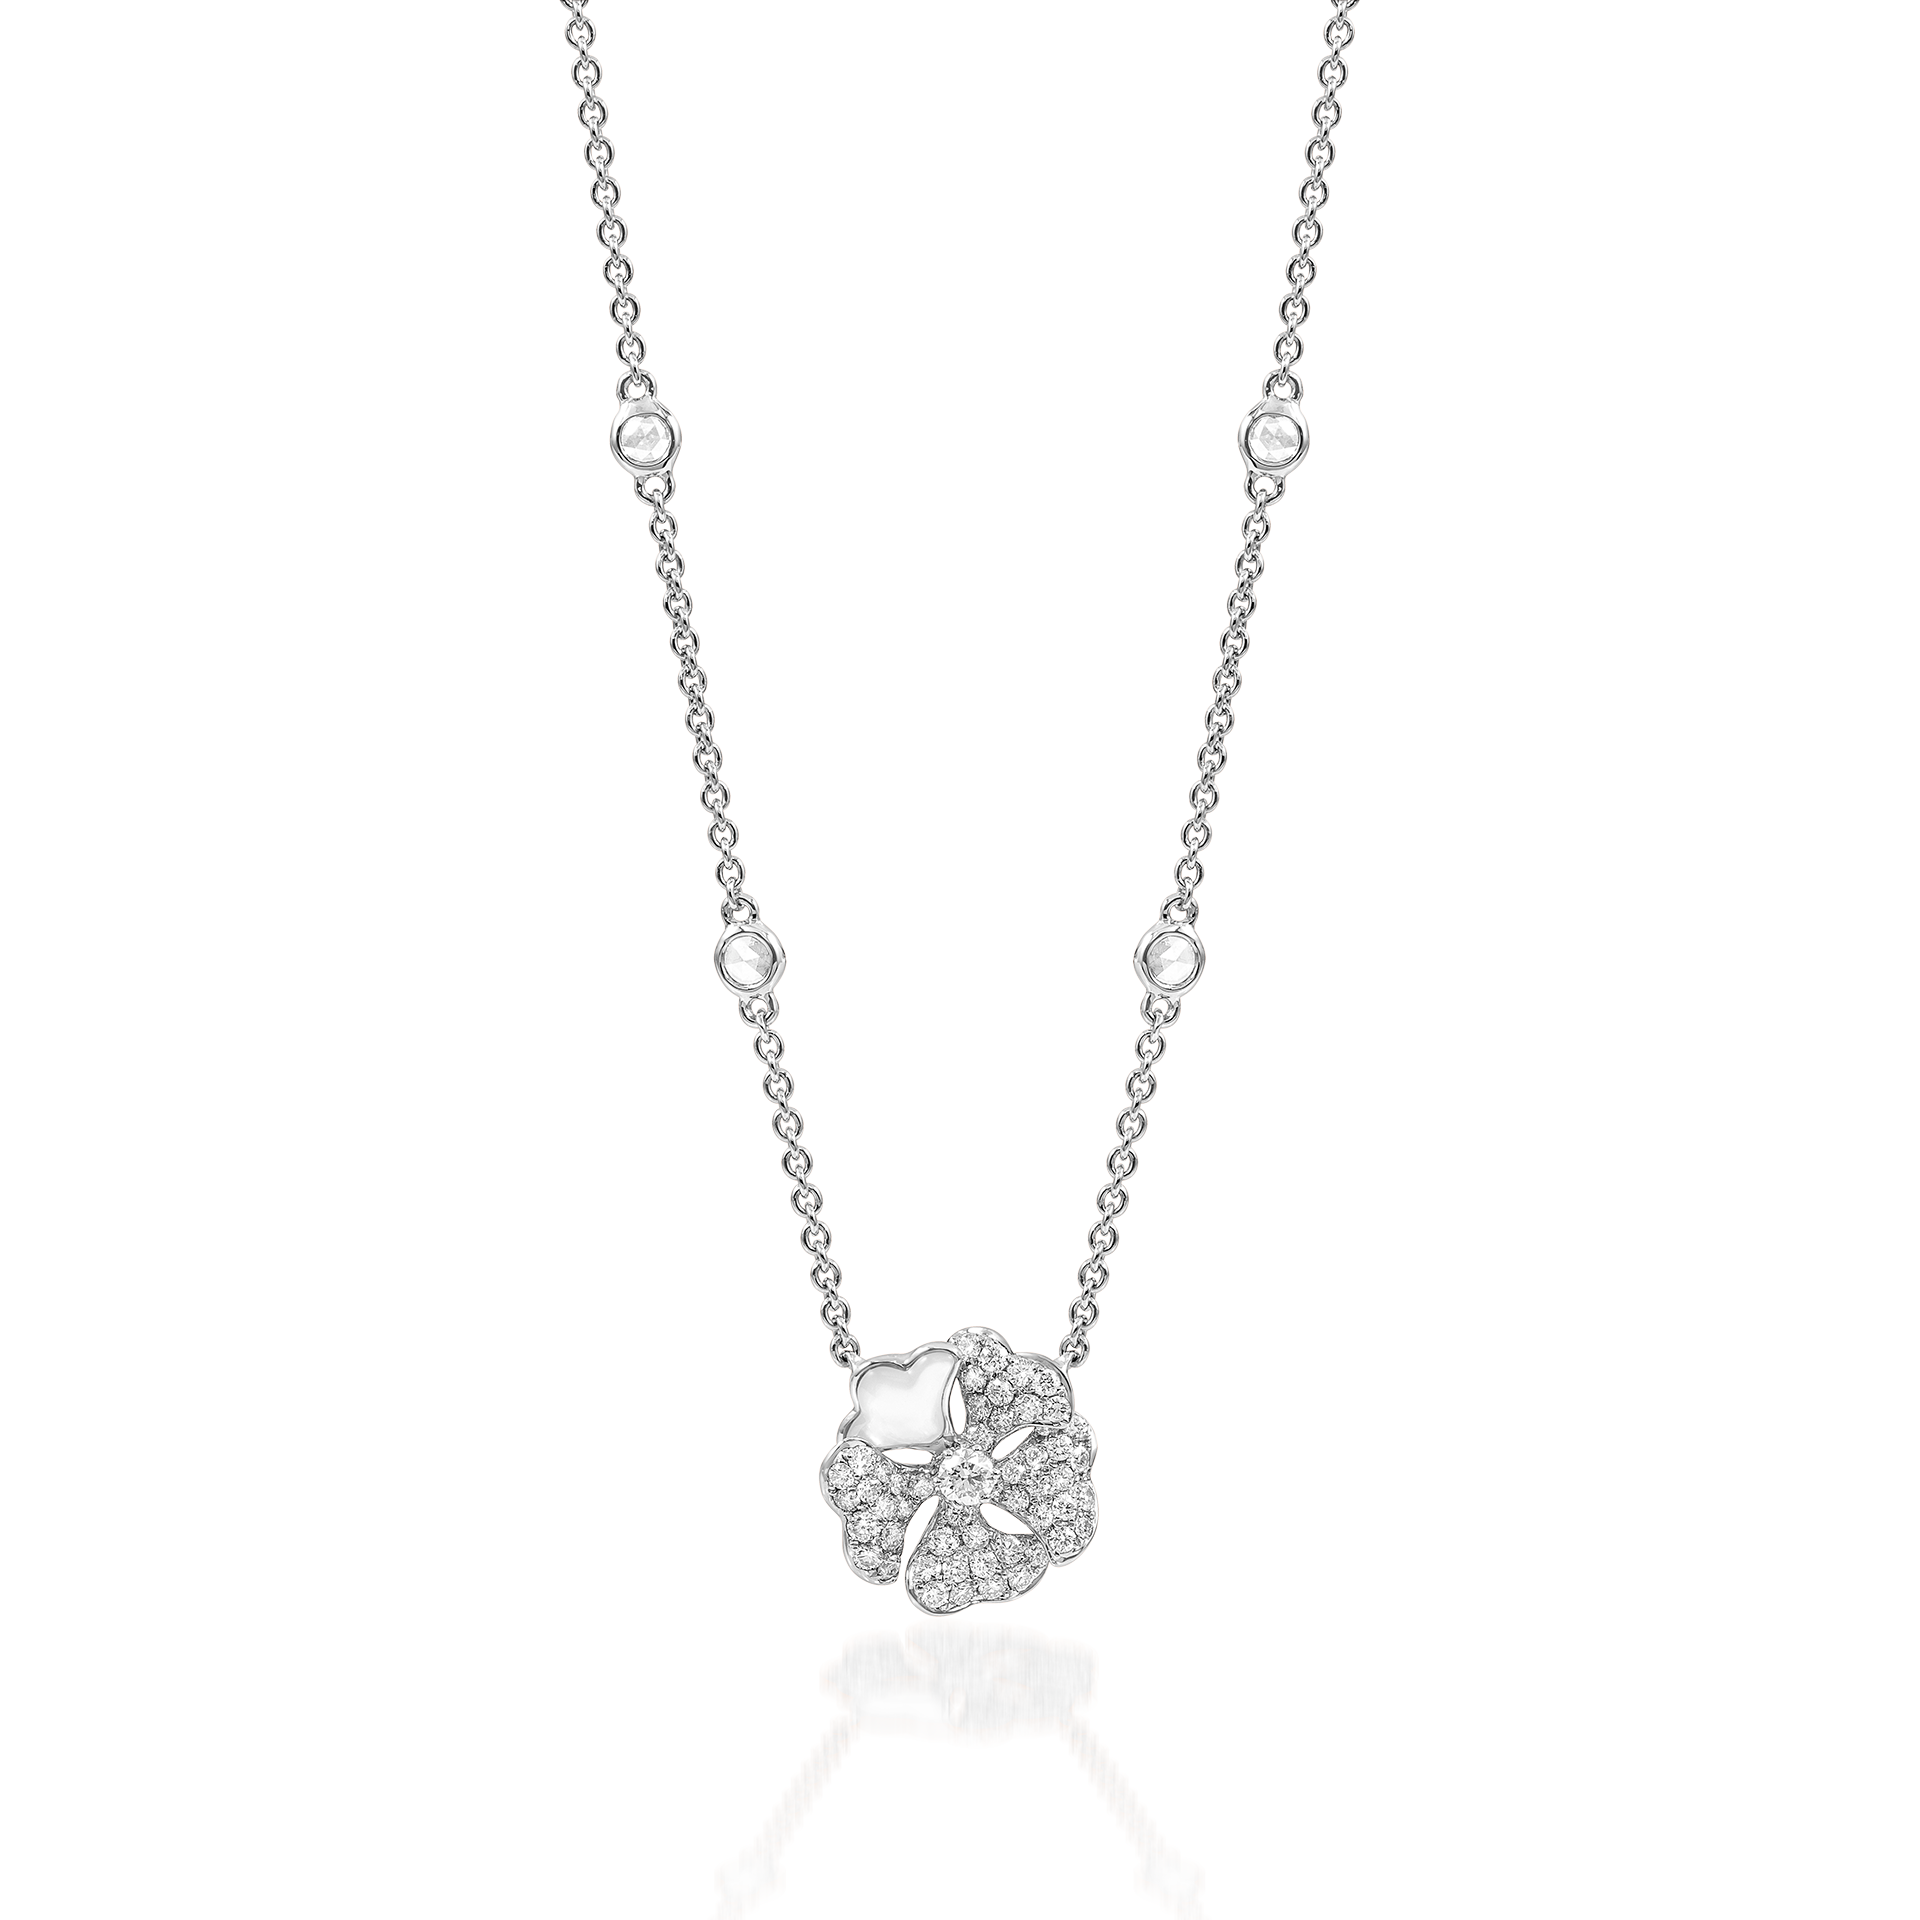 diamond ~ mother-of-pearl ~ flower pendant necklace